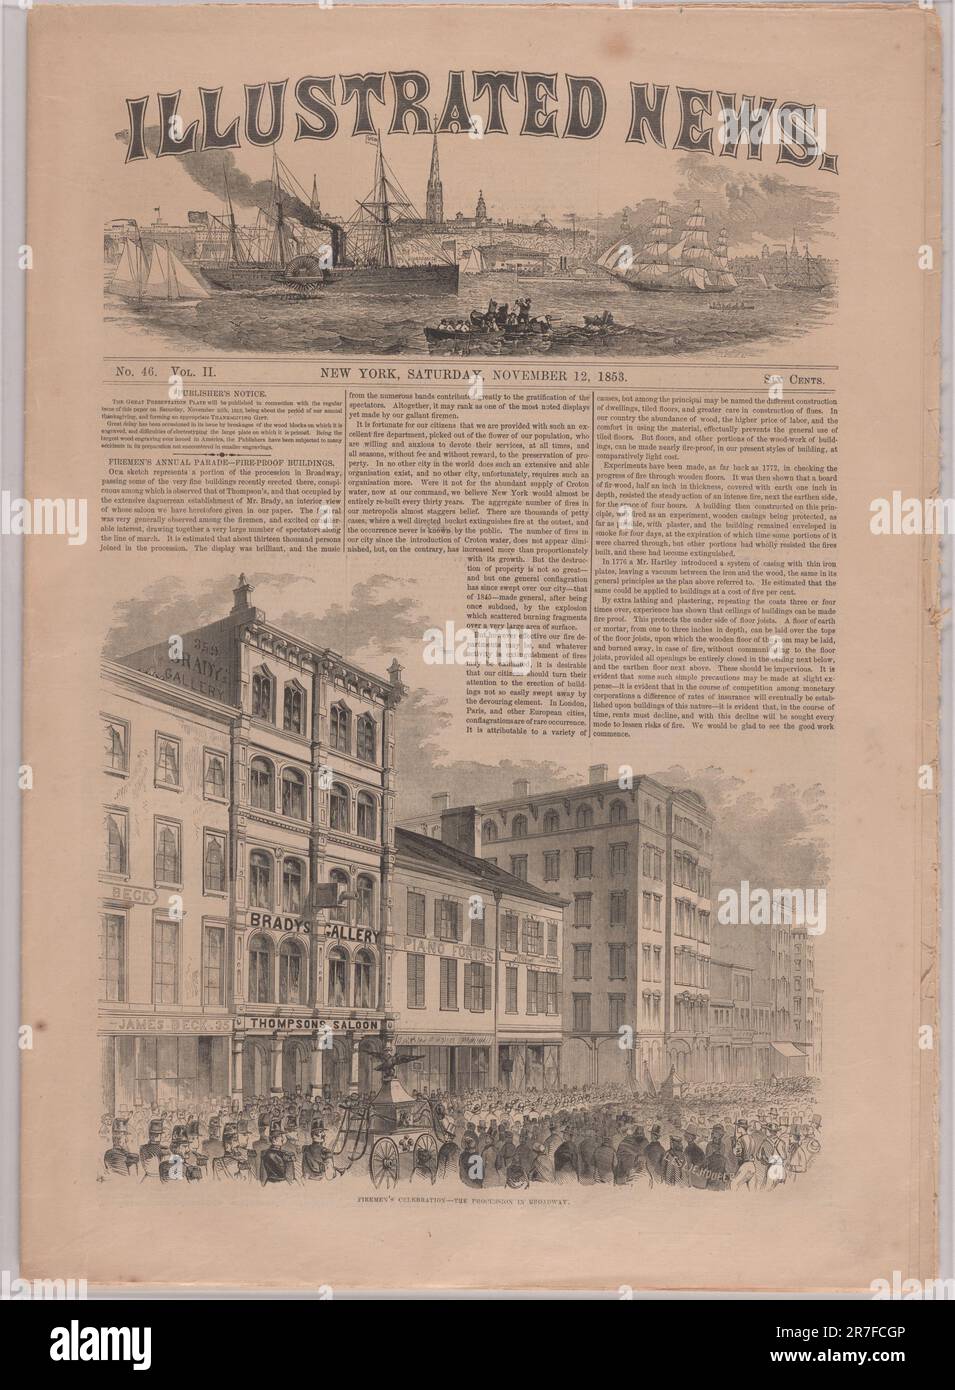 Brady's Gallery in the Illustrated News November 12, 1853 (date of publication) Stock Photo